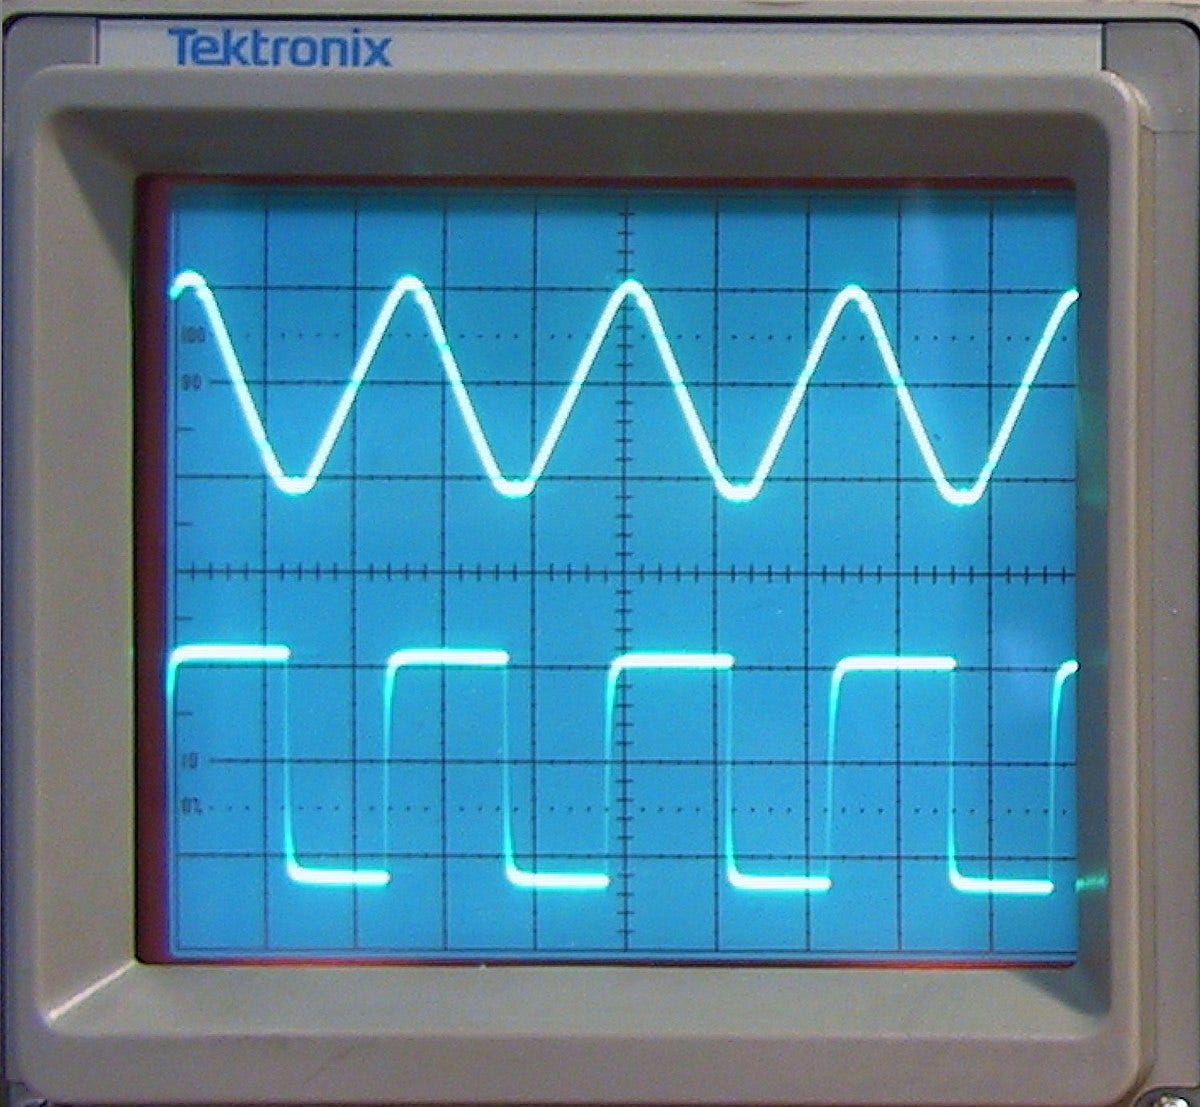 File:Triangular wave and square wave on oscilloscope screen.jpg - Wikimedia  Commons